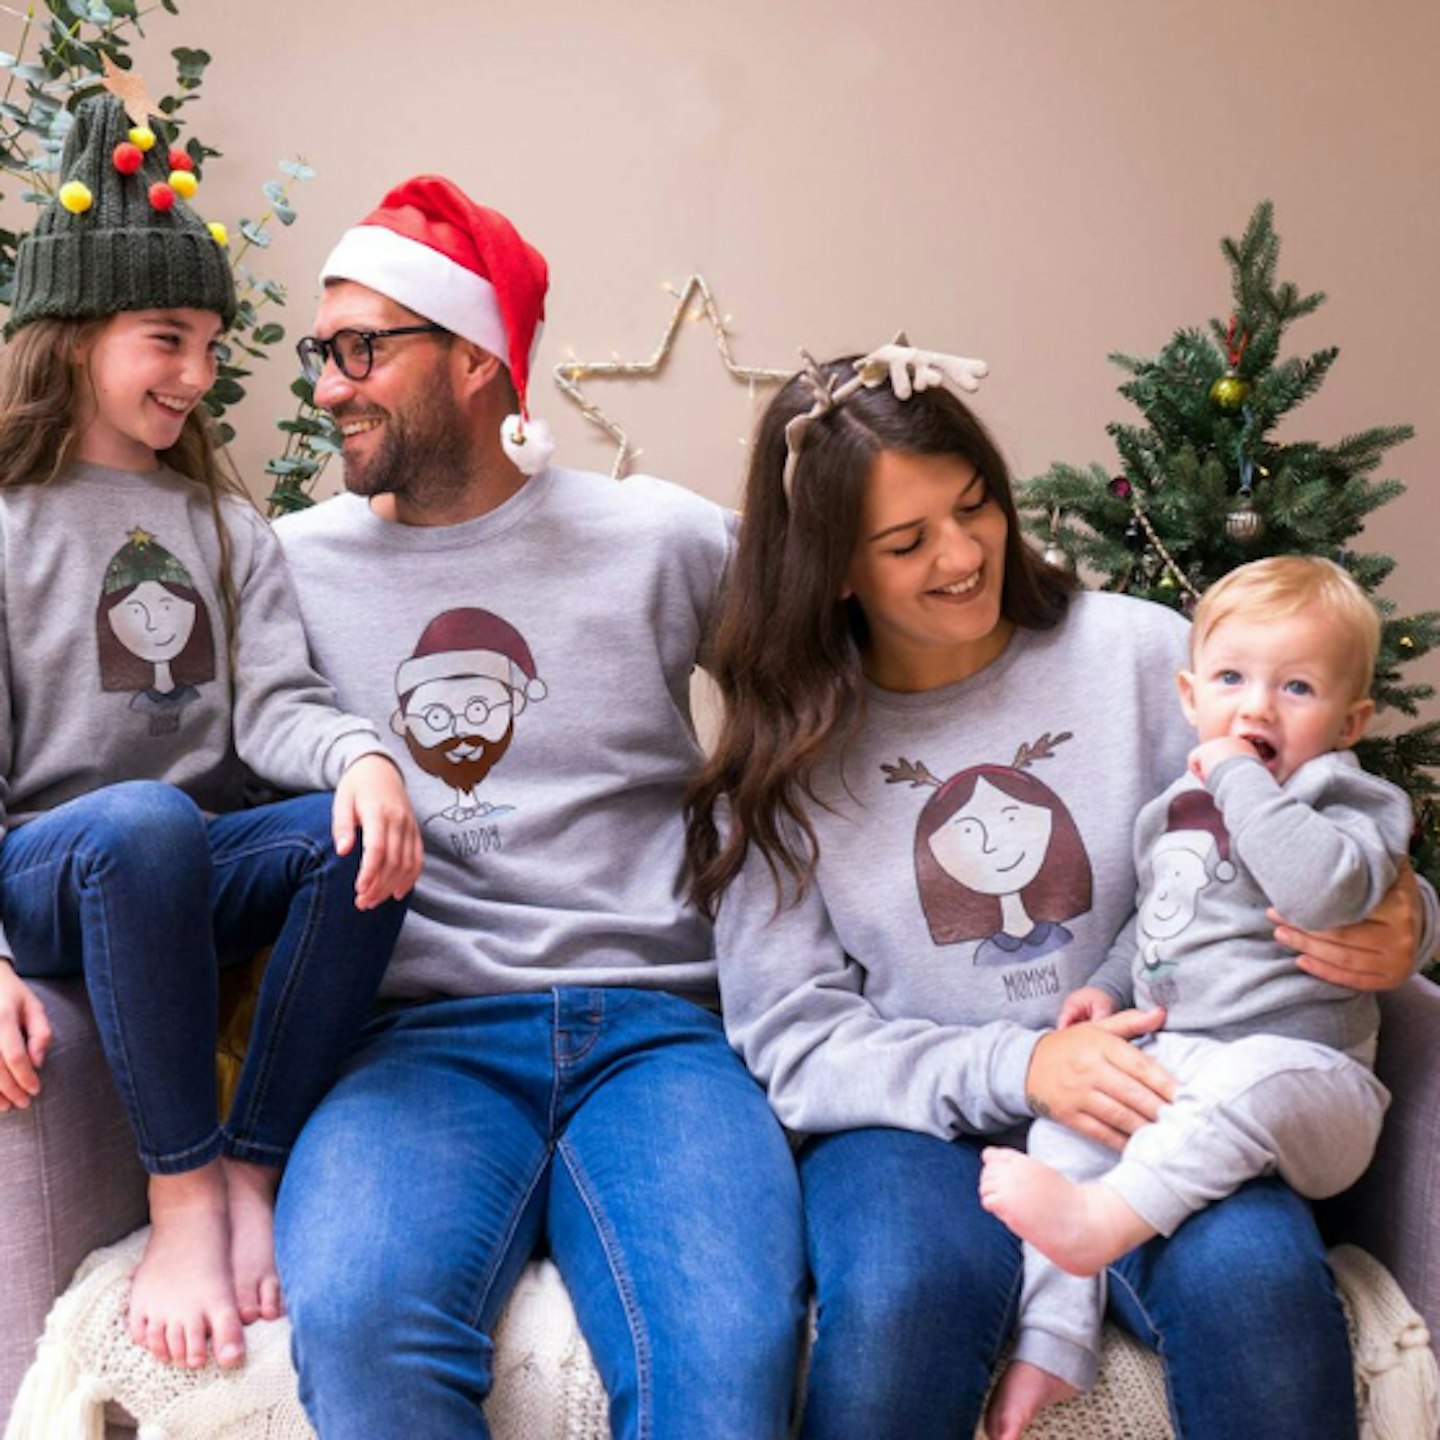 Christmas jumpers for the family portrait